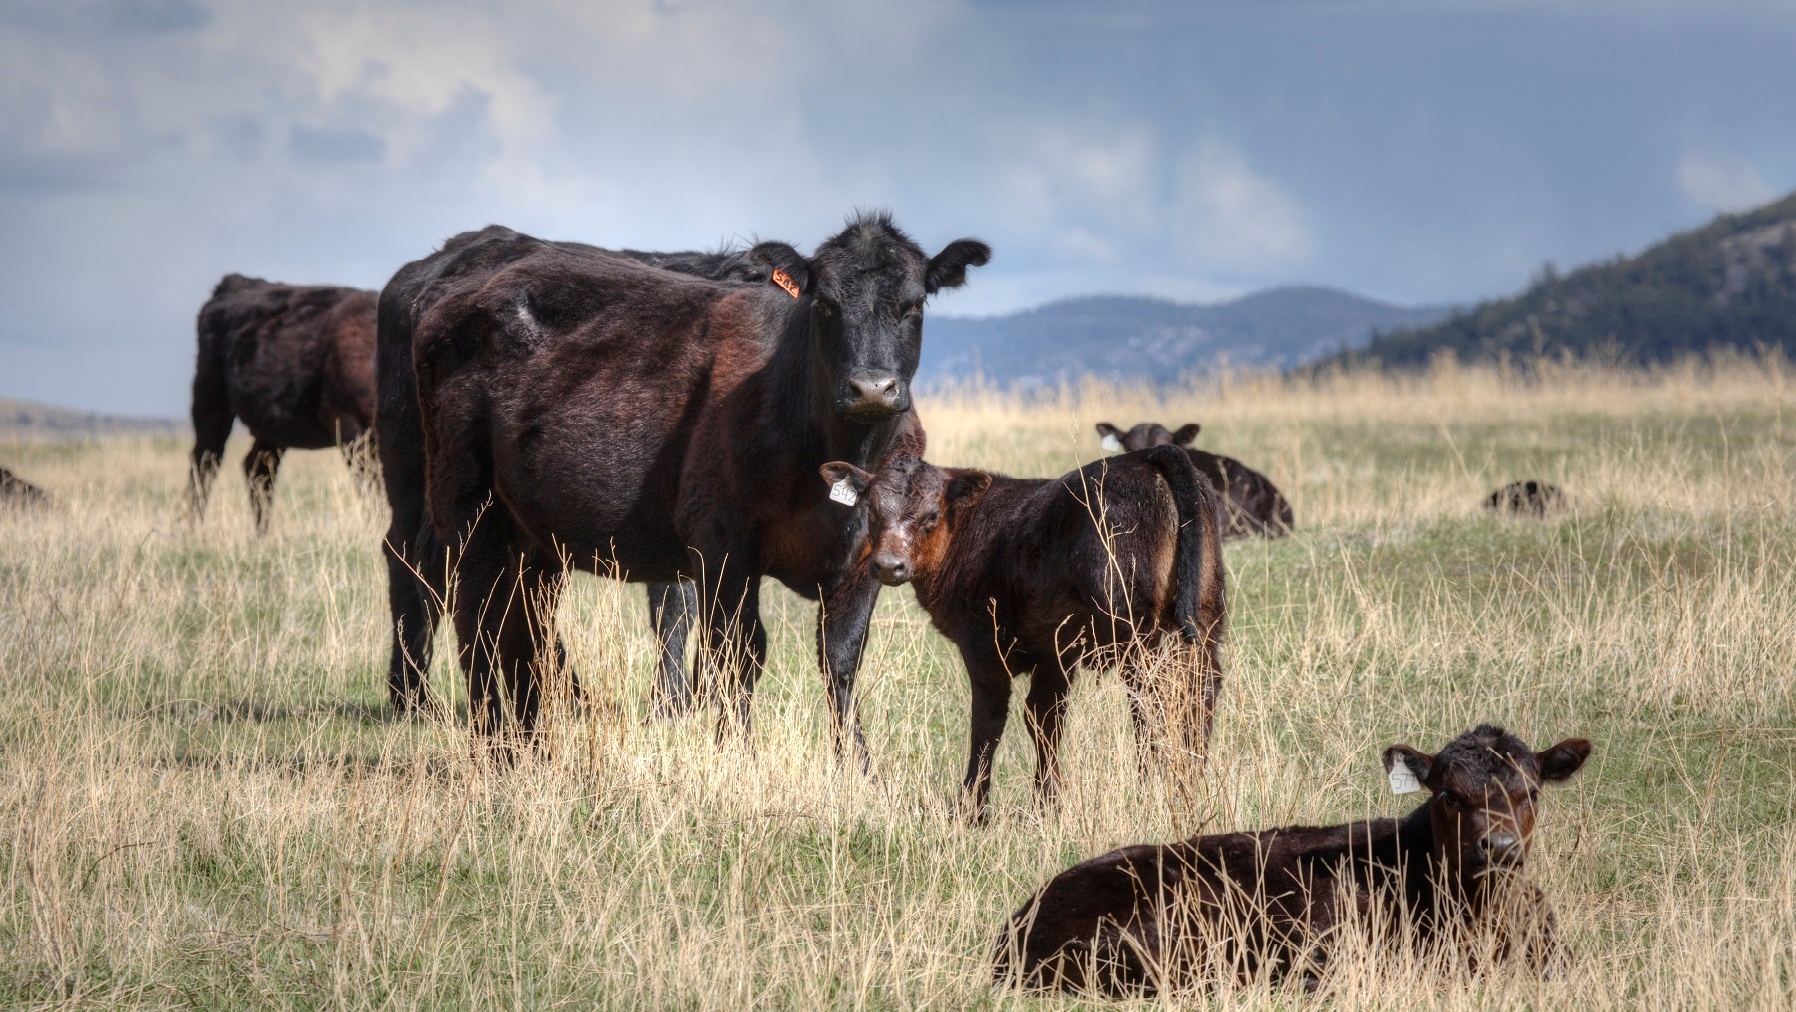 Wagyu cattle becoming popular in the U.S.